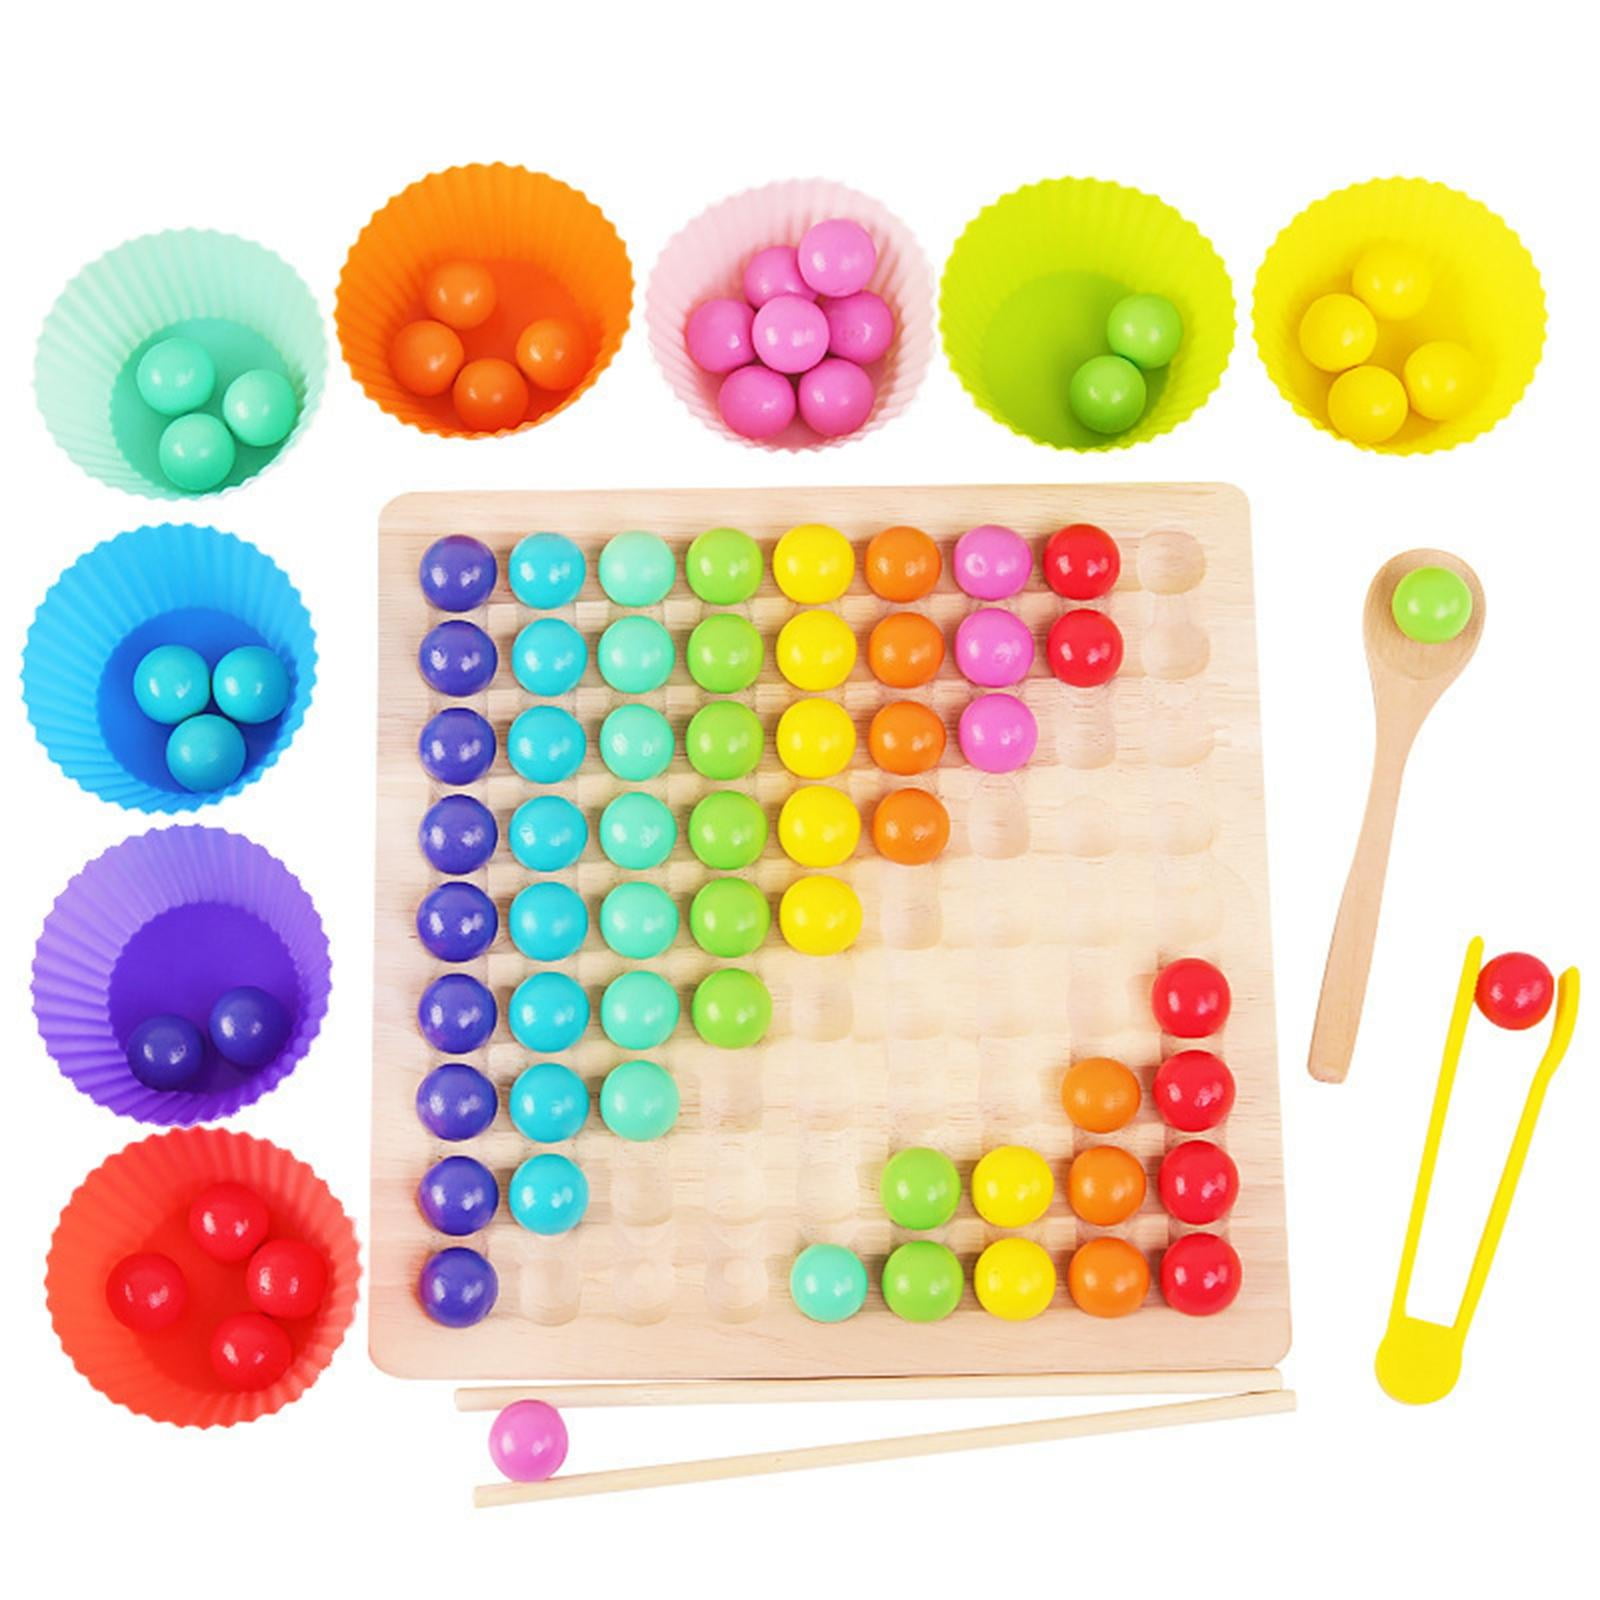 Kids Child Wooden Numbers Mathematics Early Learning Counting Educational Toy KY 